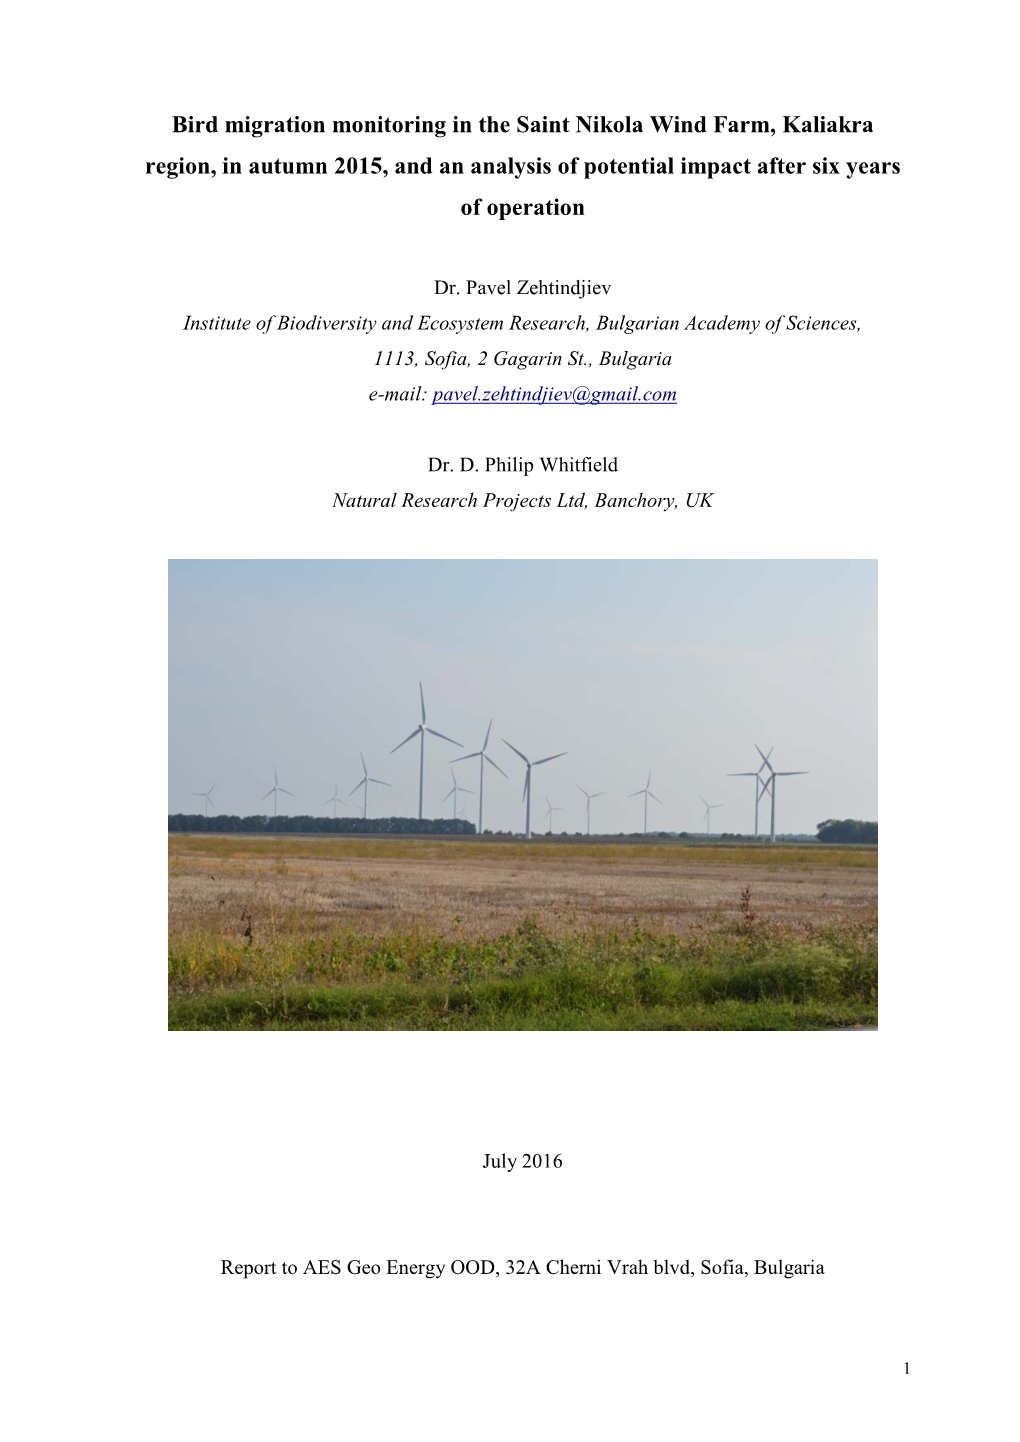 Bird Migration Monitoring in the Saint Nikola Wind Farm, Kaliakra Region, in Autumn 2015, and an Analysis of Potential Impact After Six Years of Operation